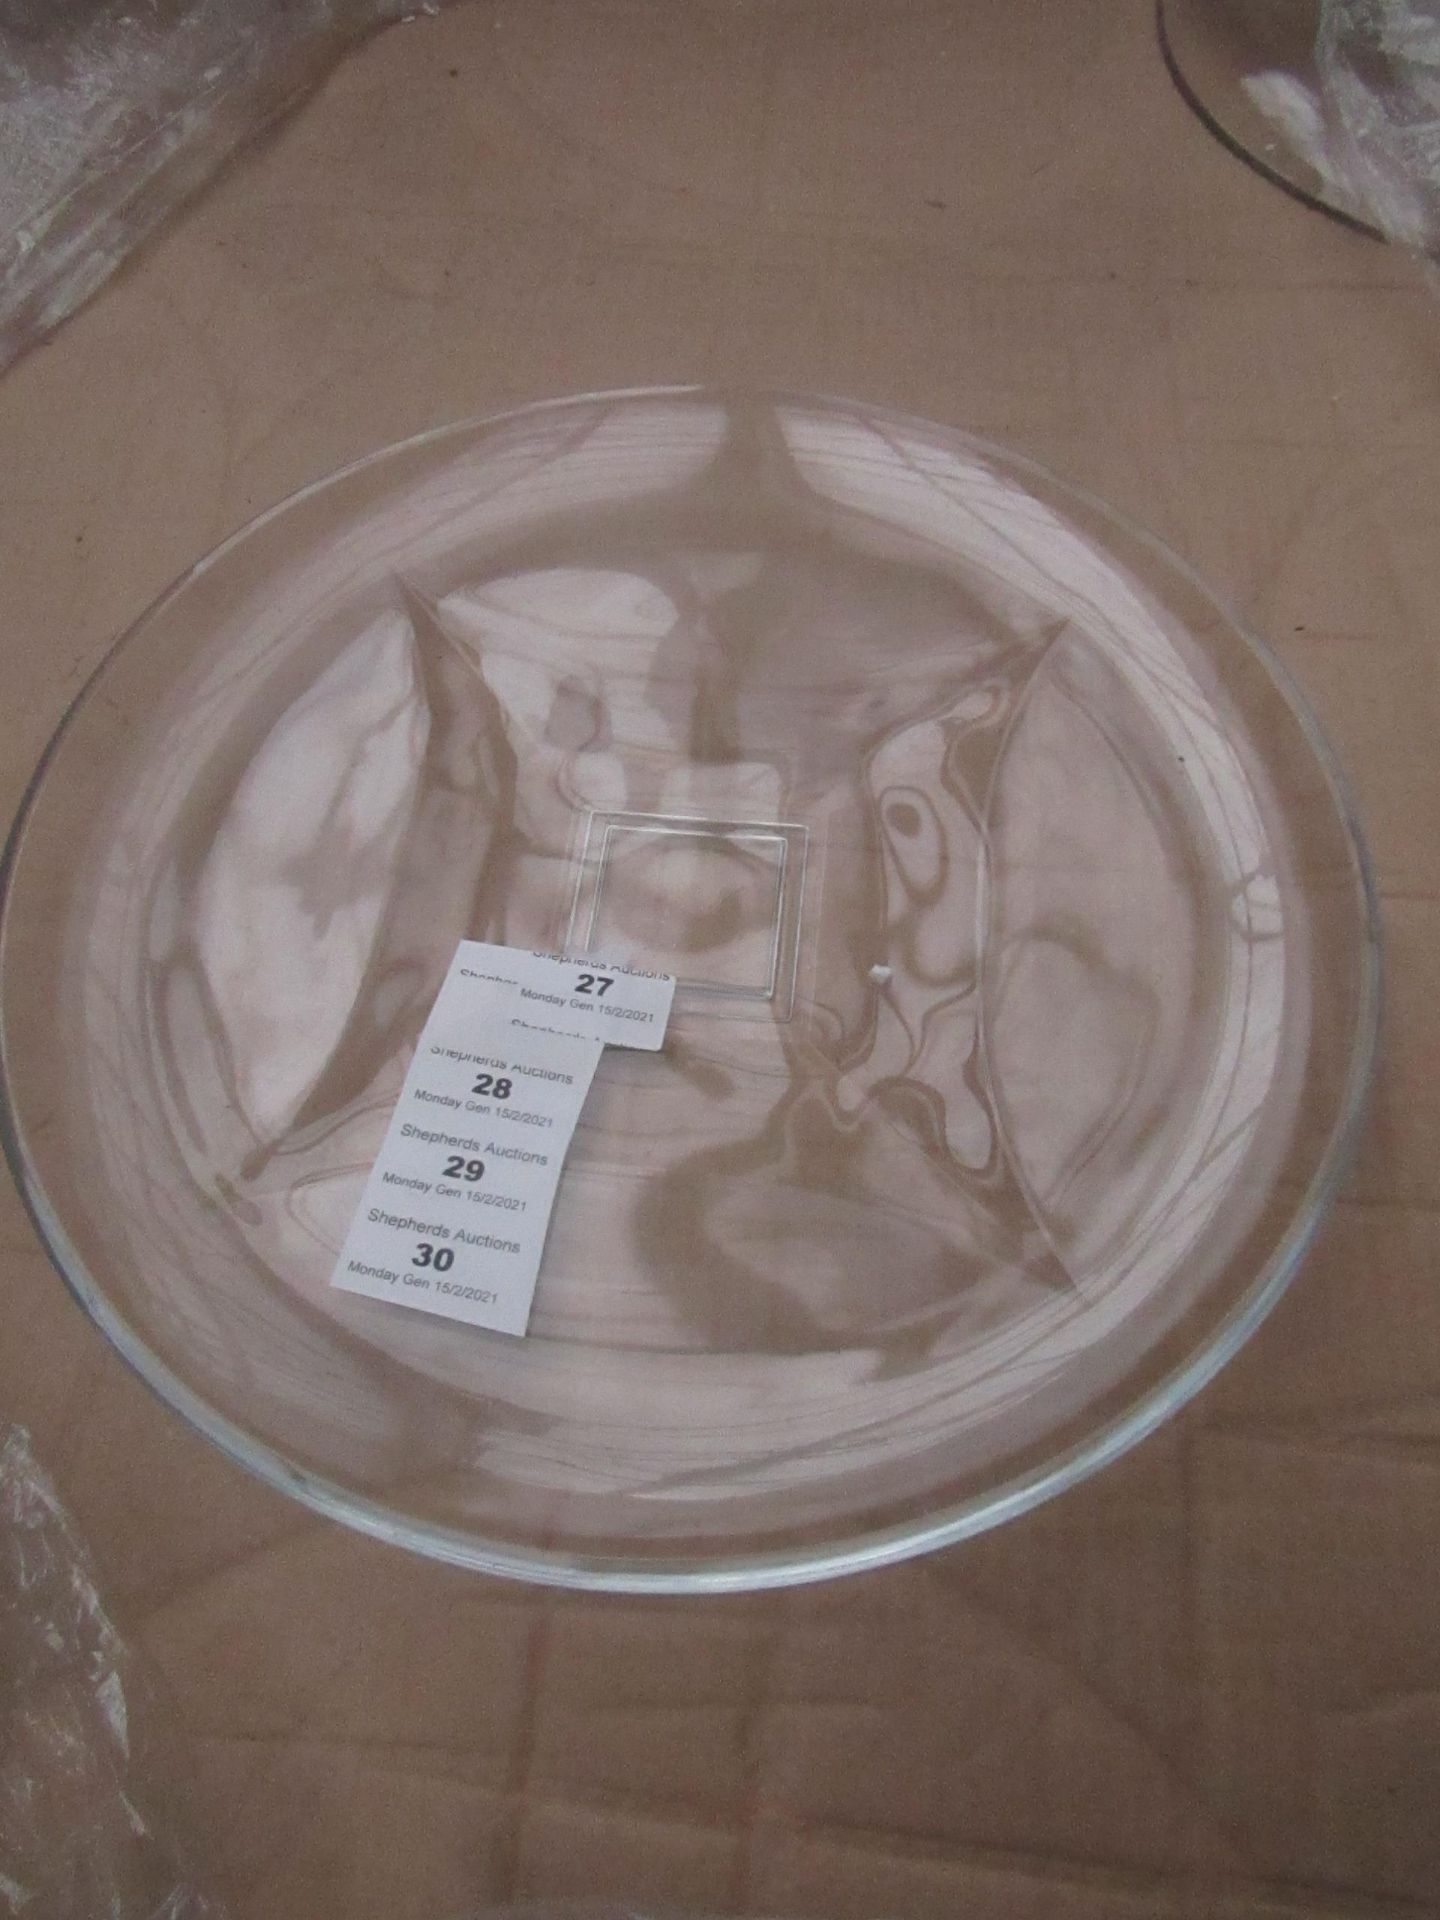 2x Large Clear Glass Plate - Unused & Good Condition.